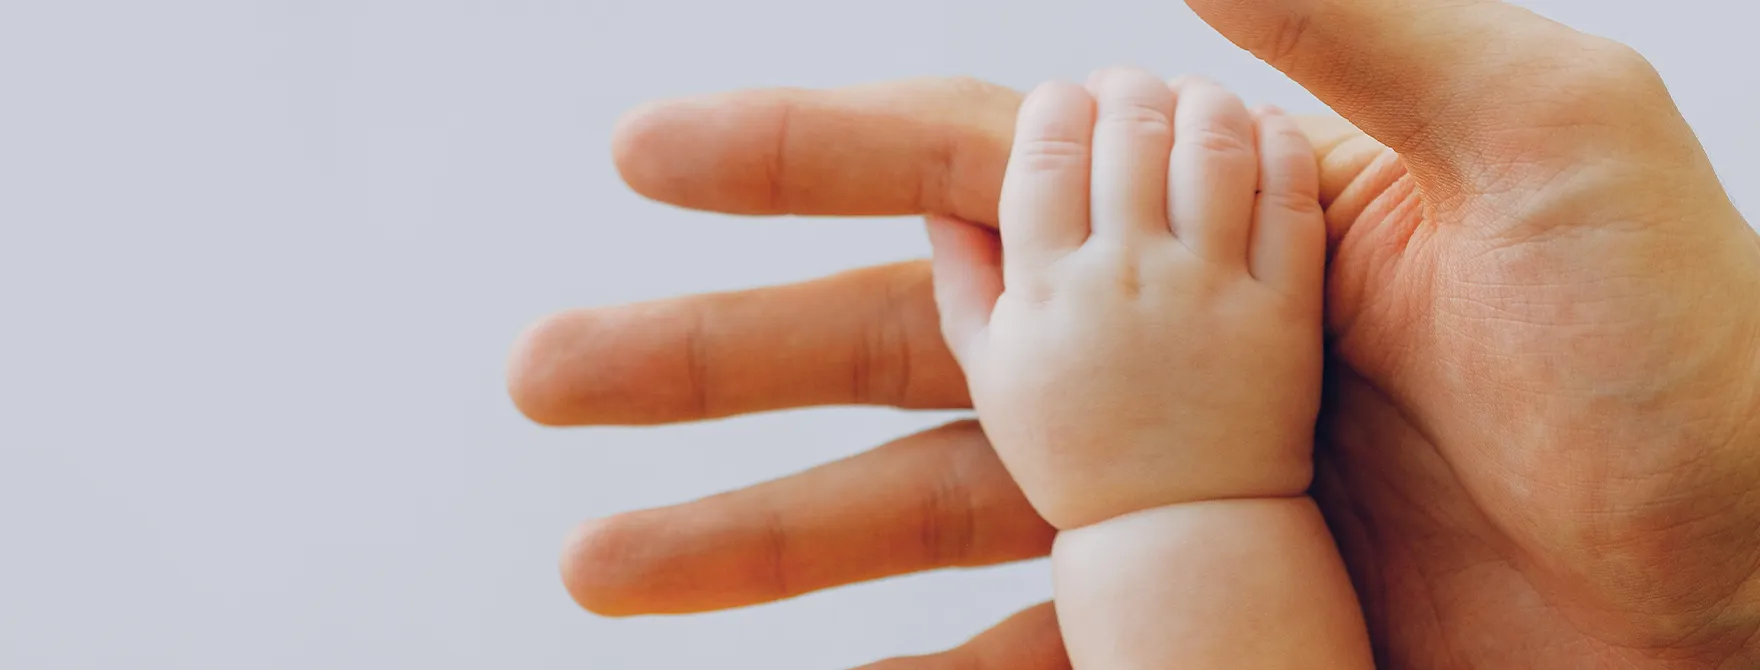 A parent holding a baby's hand